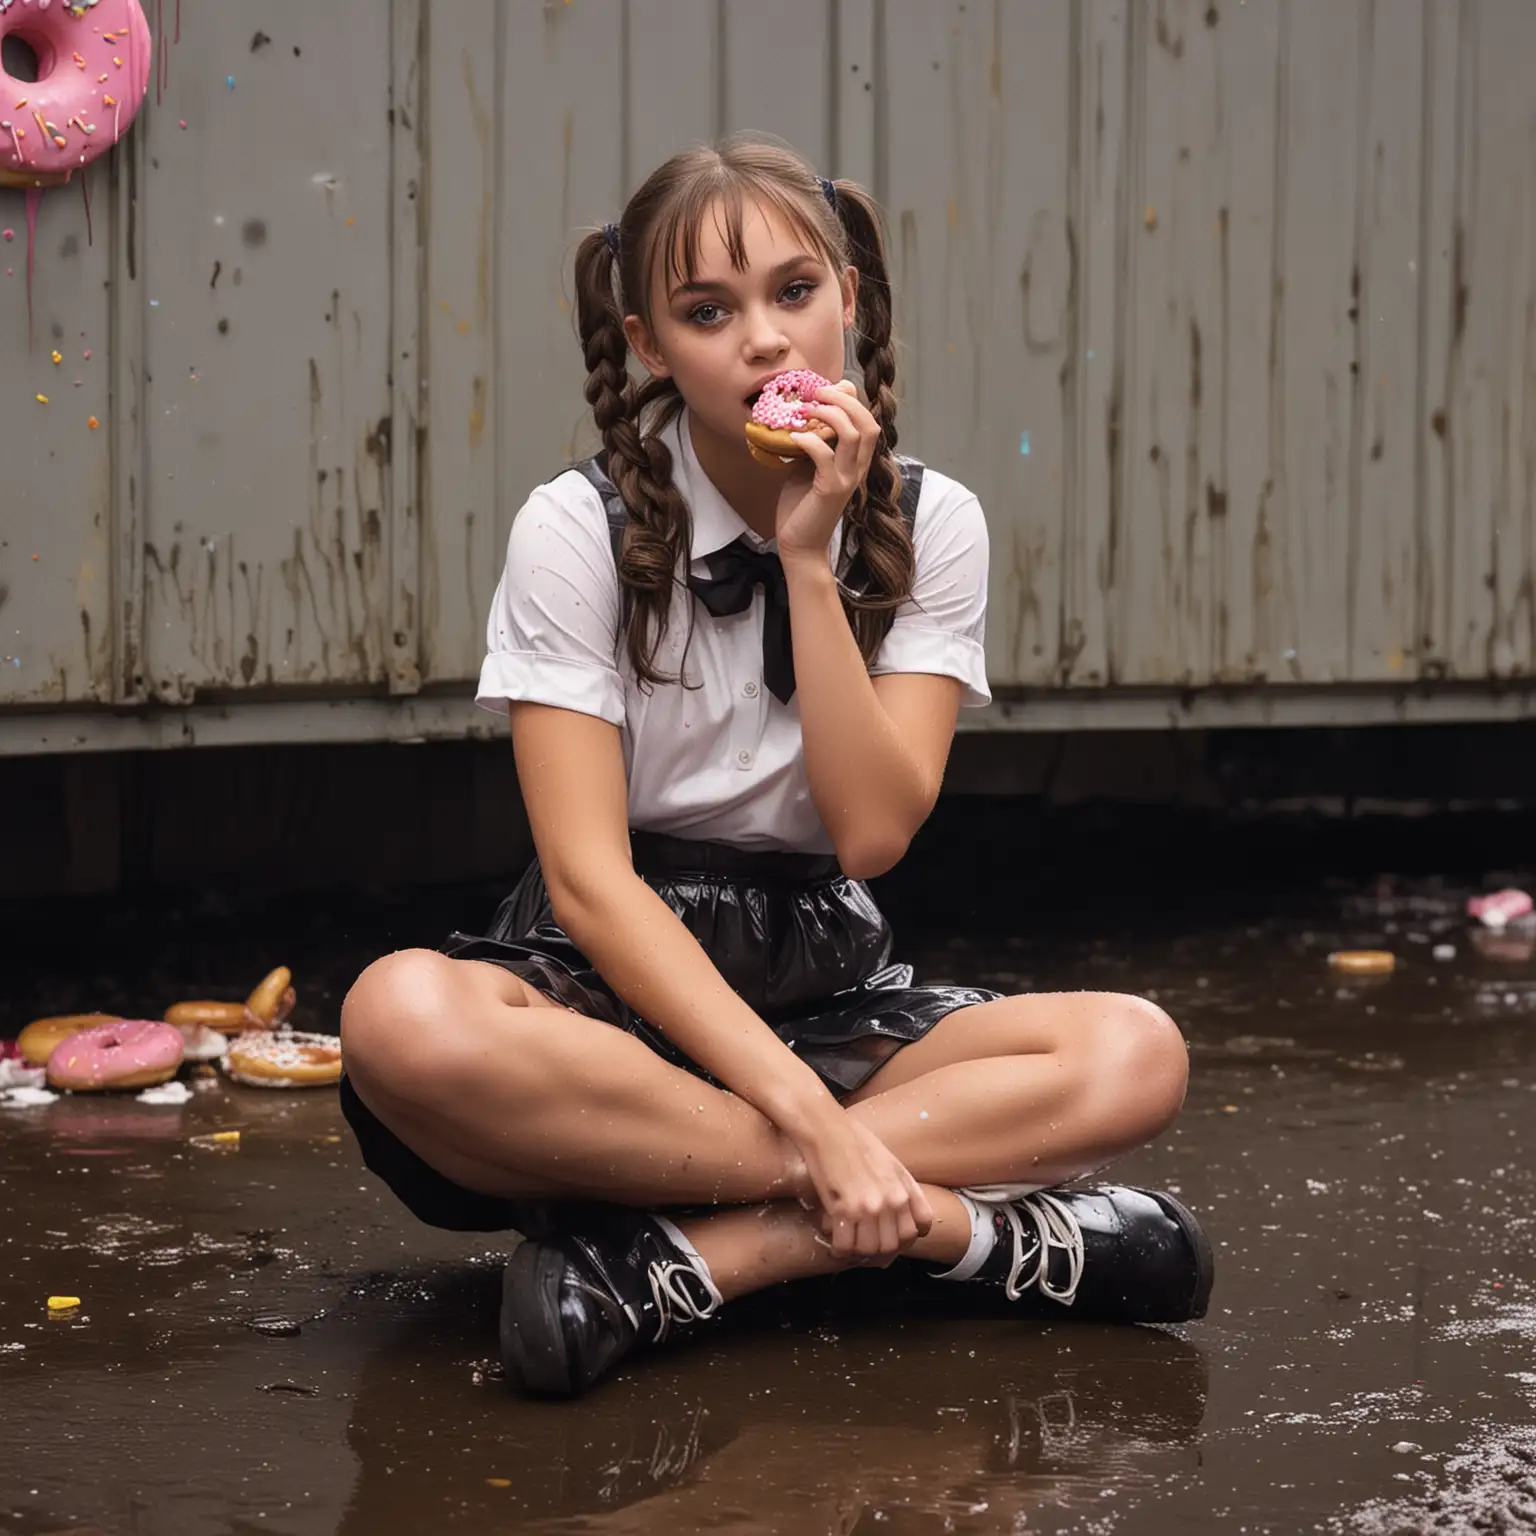 Urban Night Scene Young Maddie Ziegler Enjoying a Donut by the Dumpster